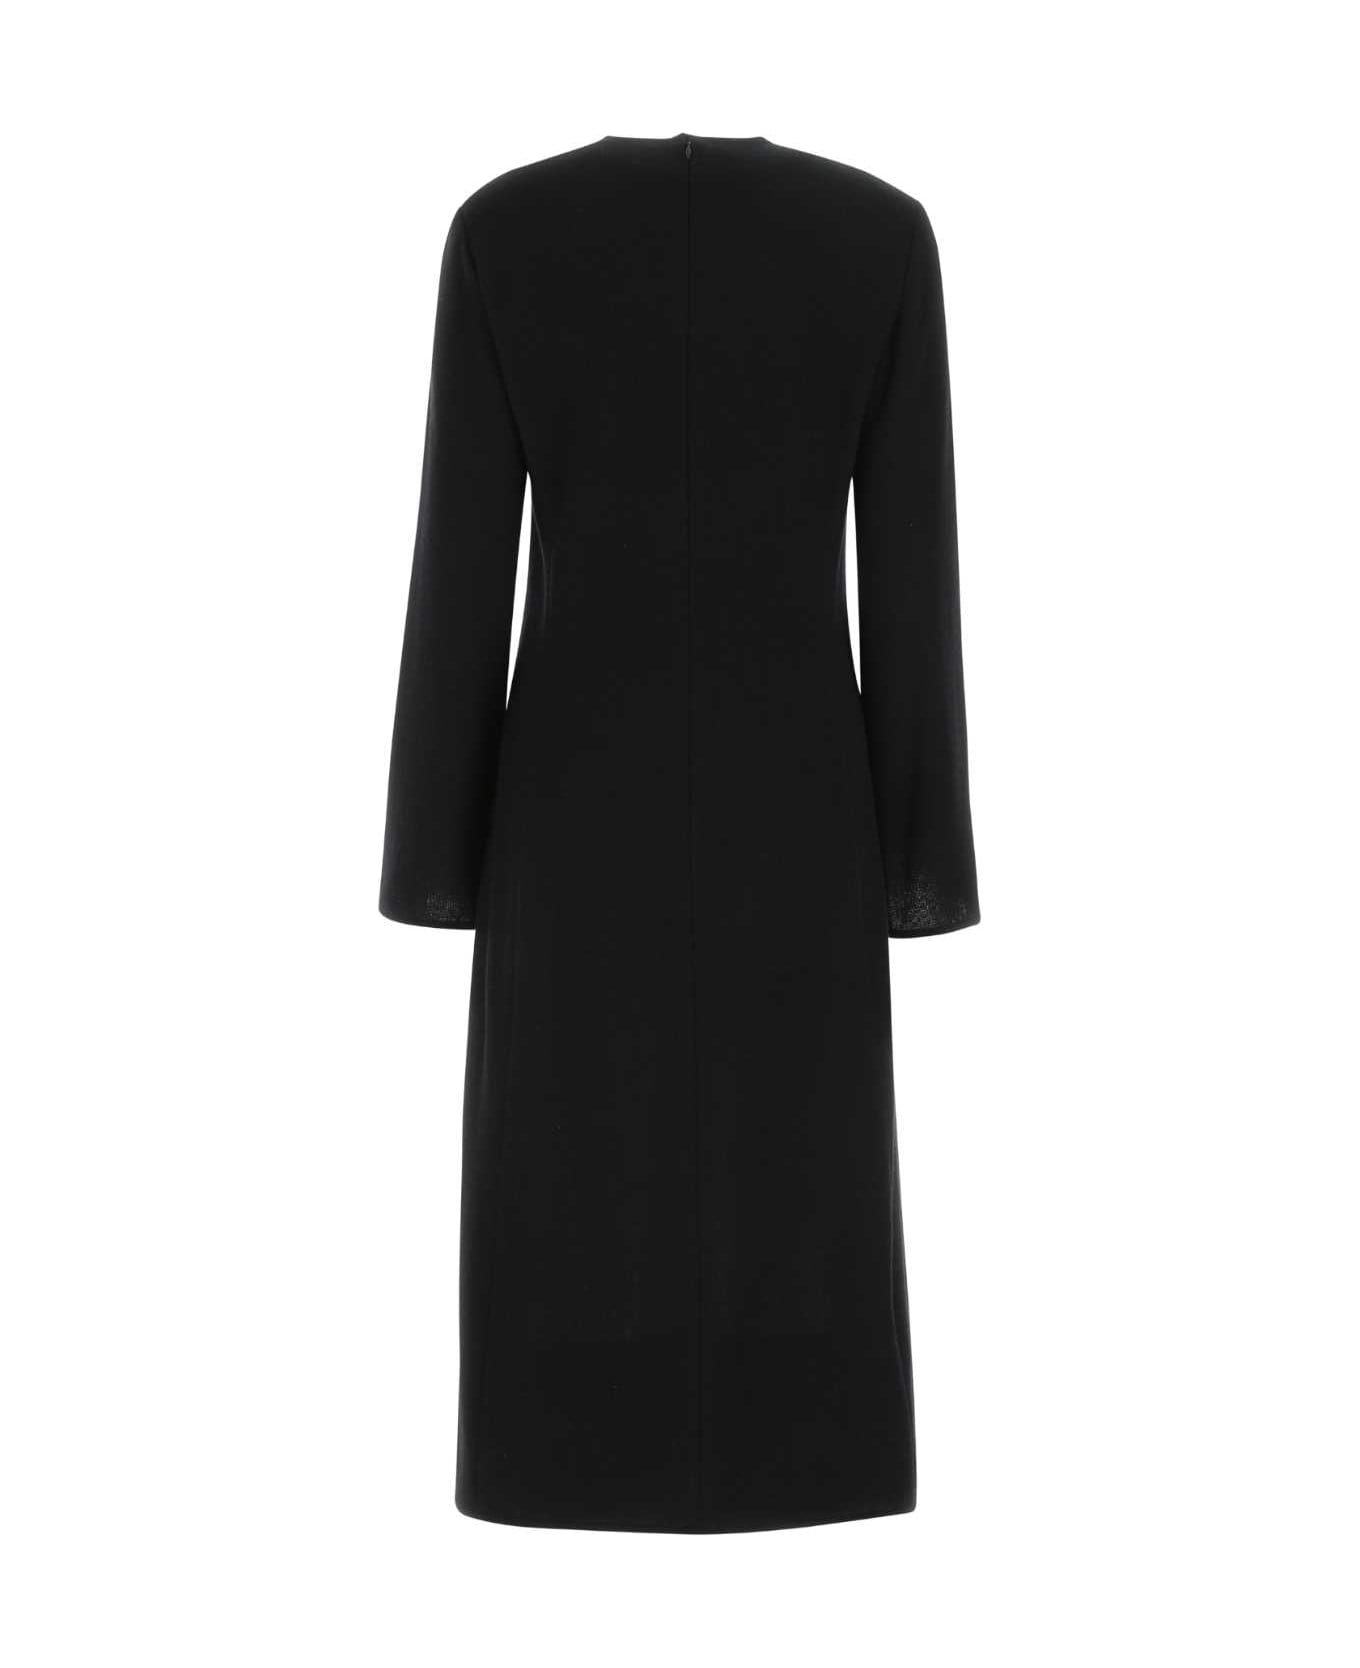 Chloé Black Wool And Cashmere Dress - 001